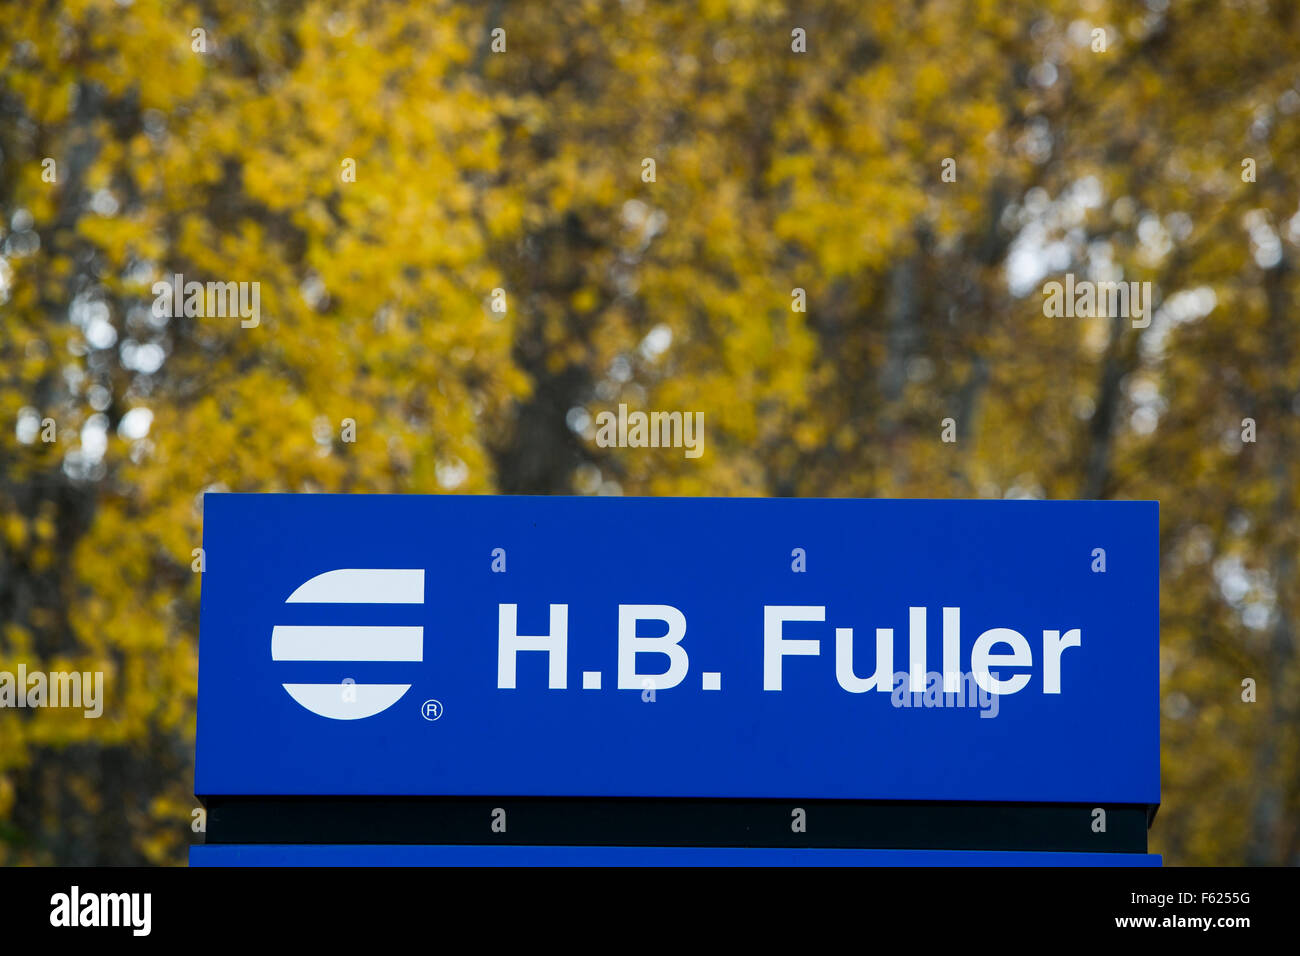 A logo sign outside of the headquarters of the H.B. Fuller Company in St. Paul, Minnesota on October 24, 2015. Stock Photo